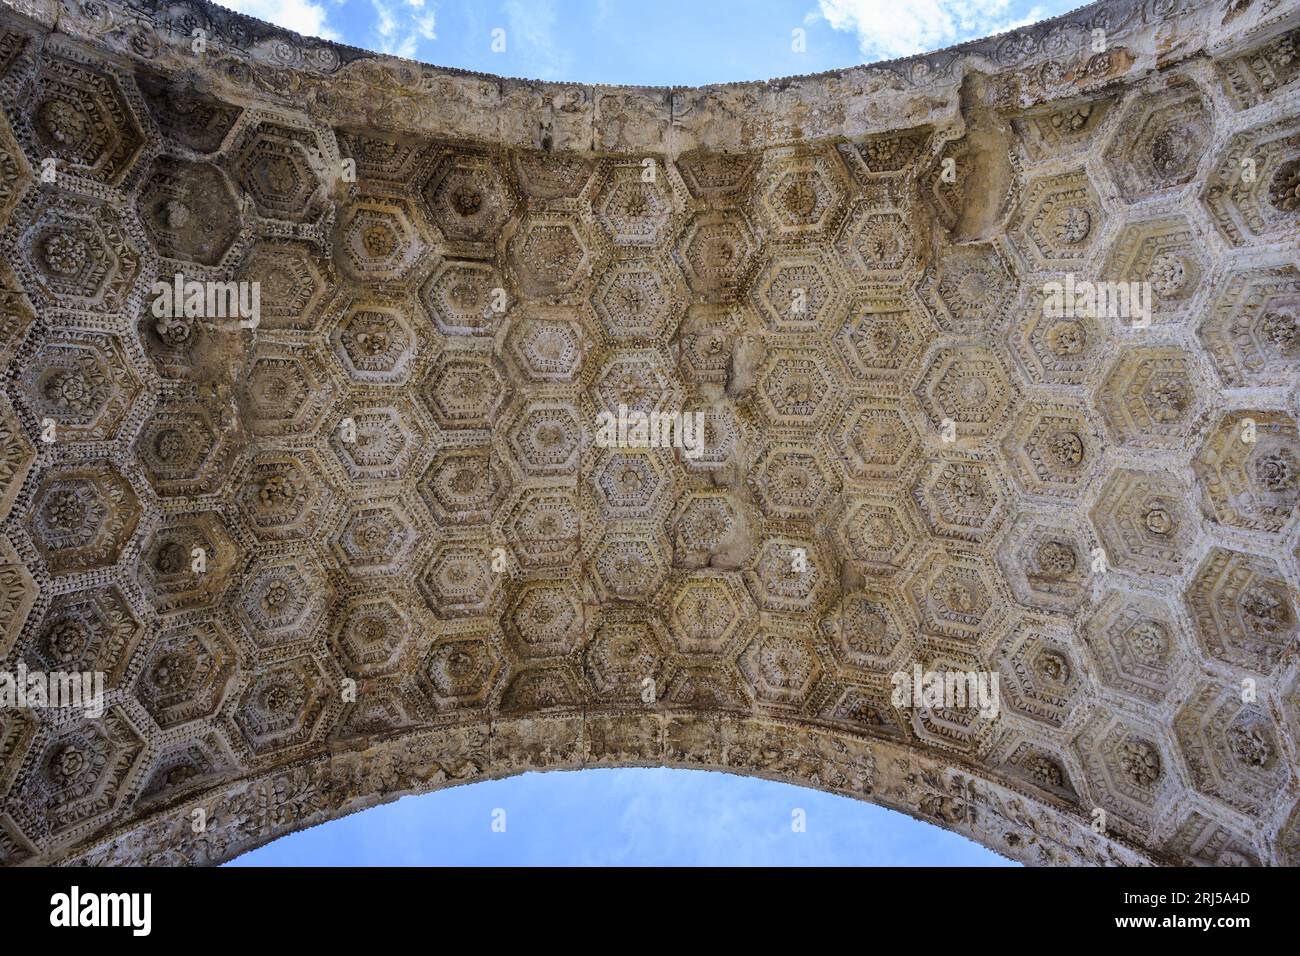 The Triumphal Arch dates from 20AD and was built by the Romans, sunny day in springtime Stock Photo